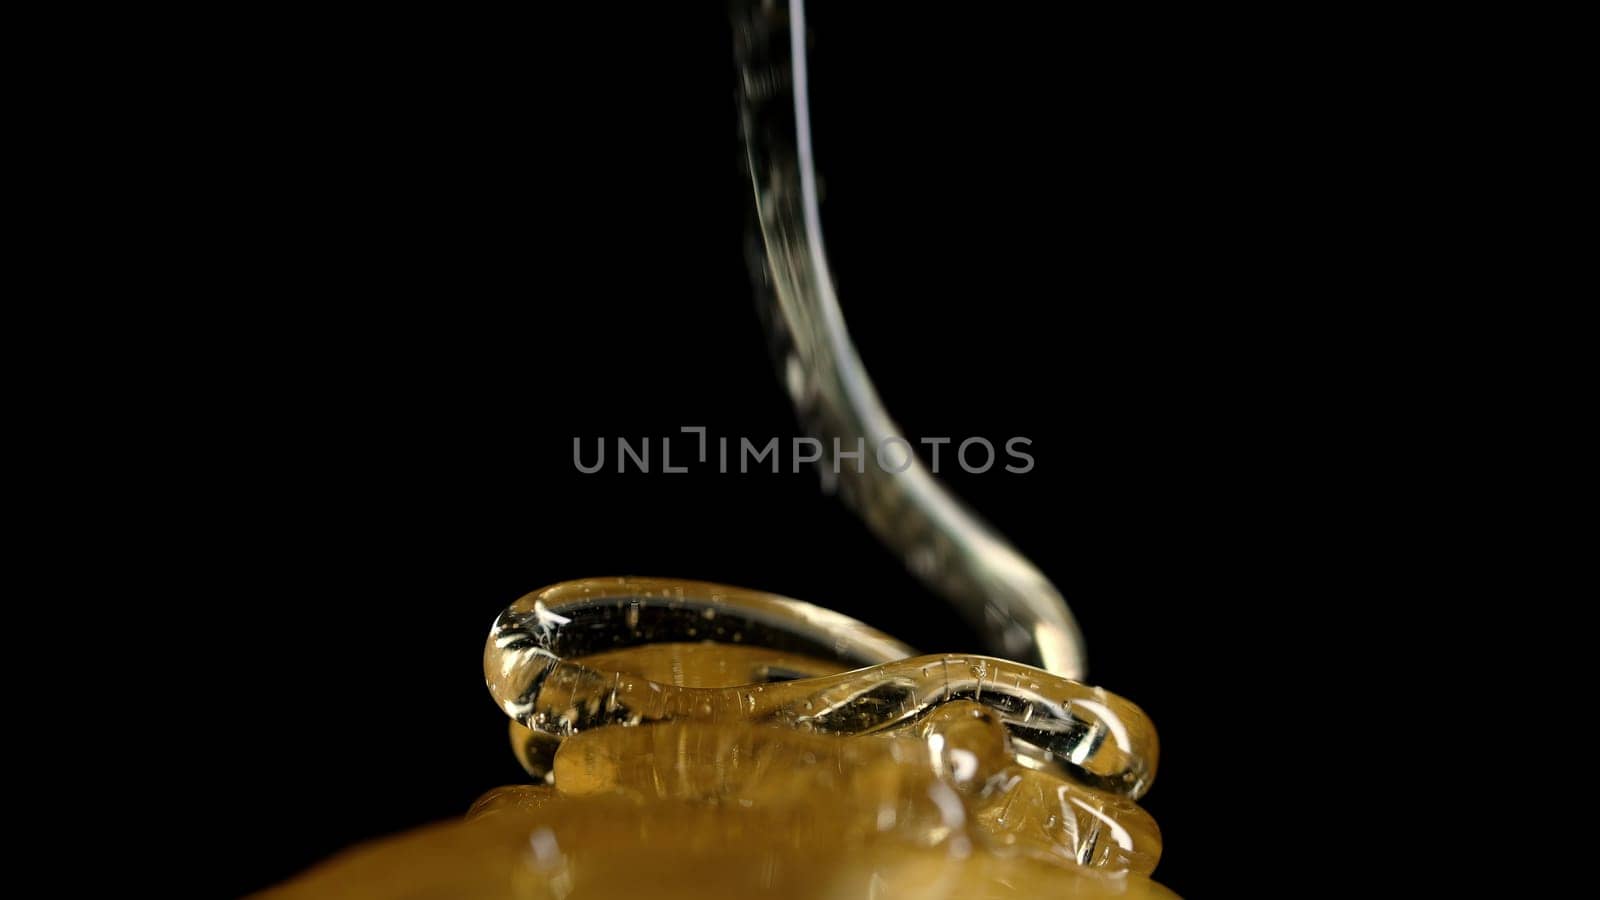 Honey sweet flower stream pouring on black background. Golden liquid nectar flows. Thick sweet drops macro view. Healthy syrup, delicious food. High quality